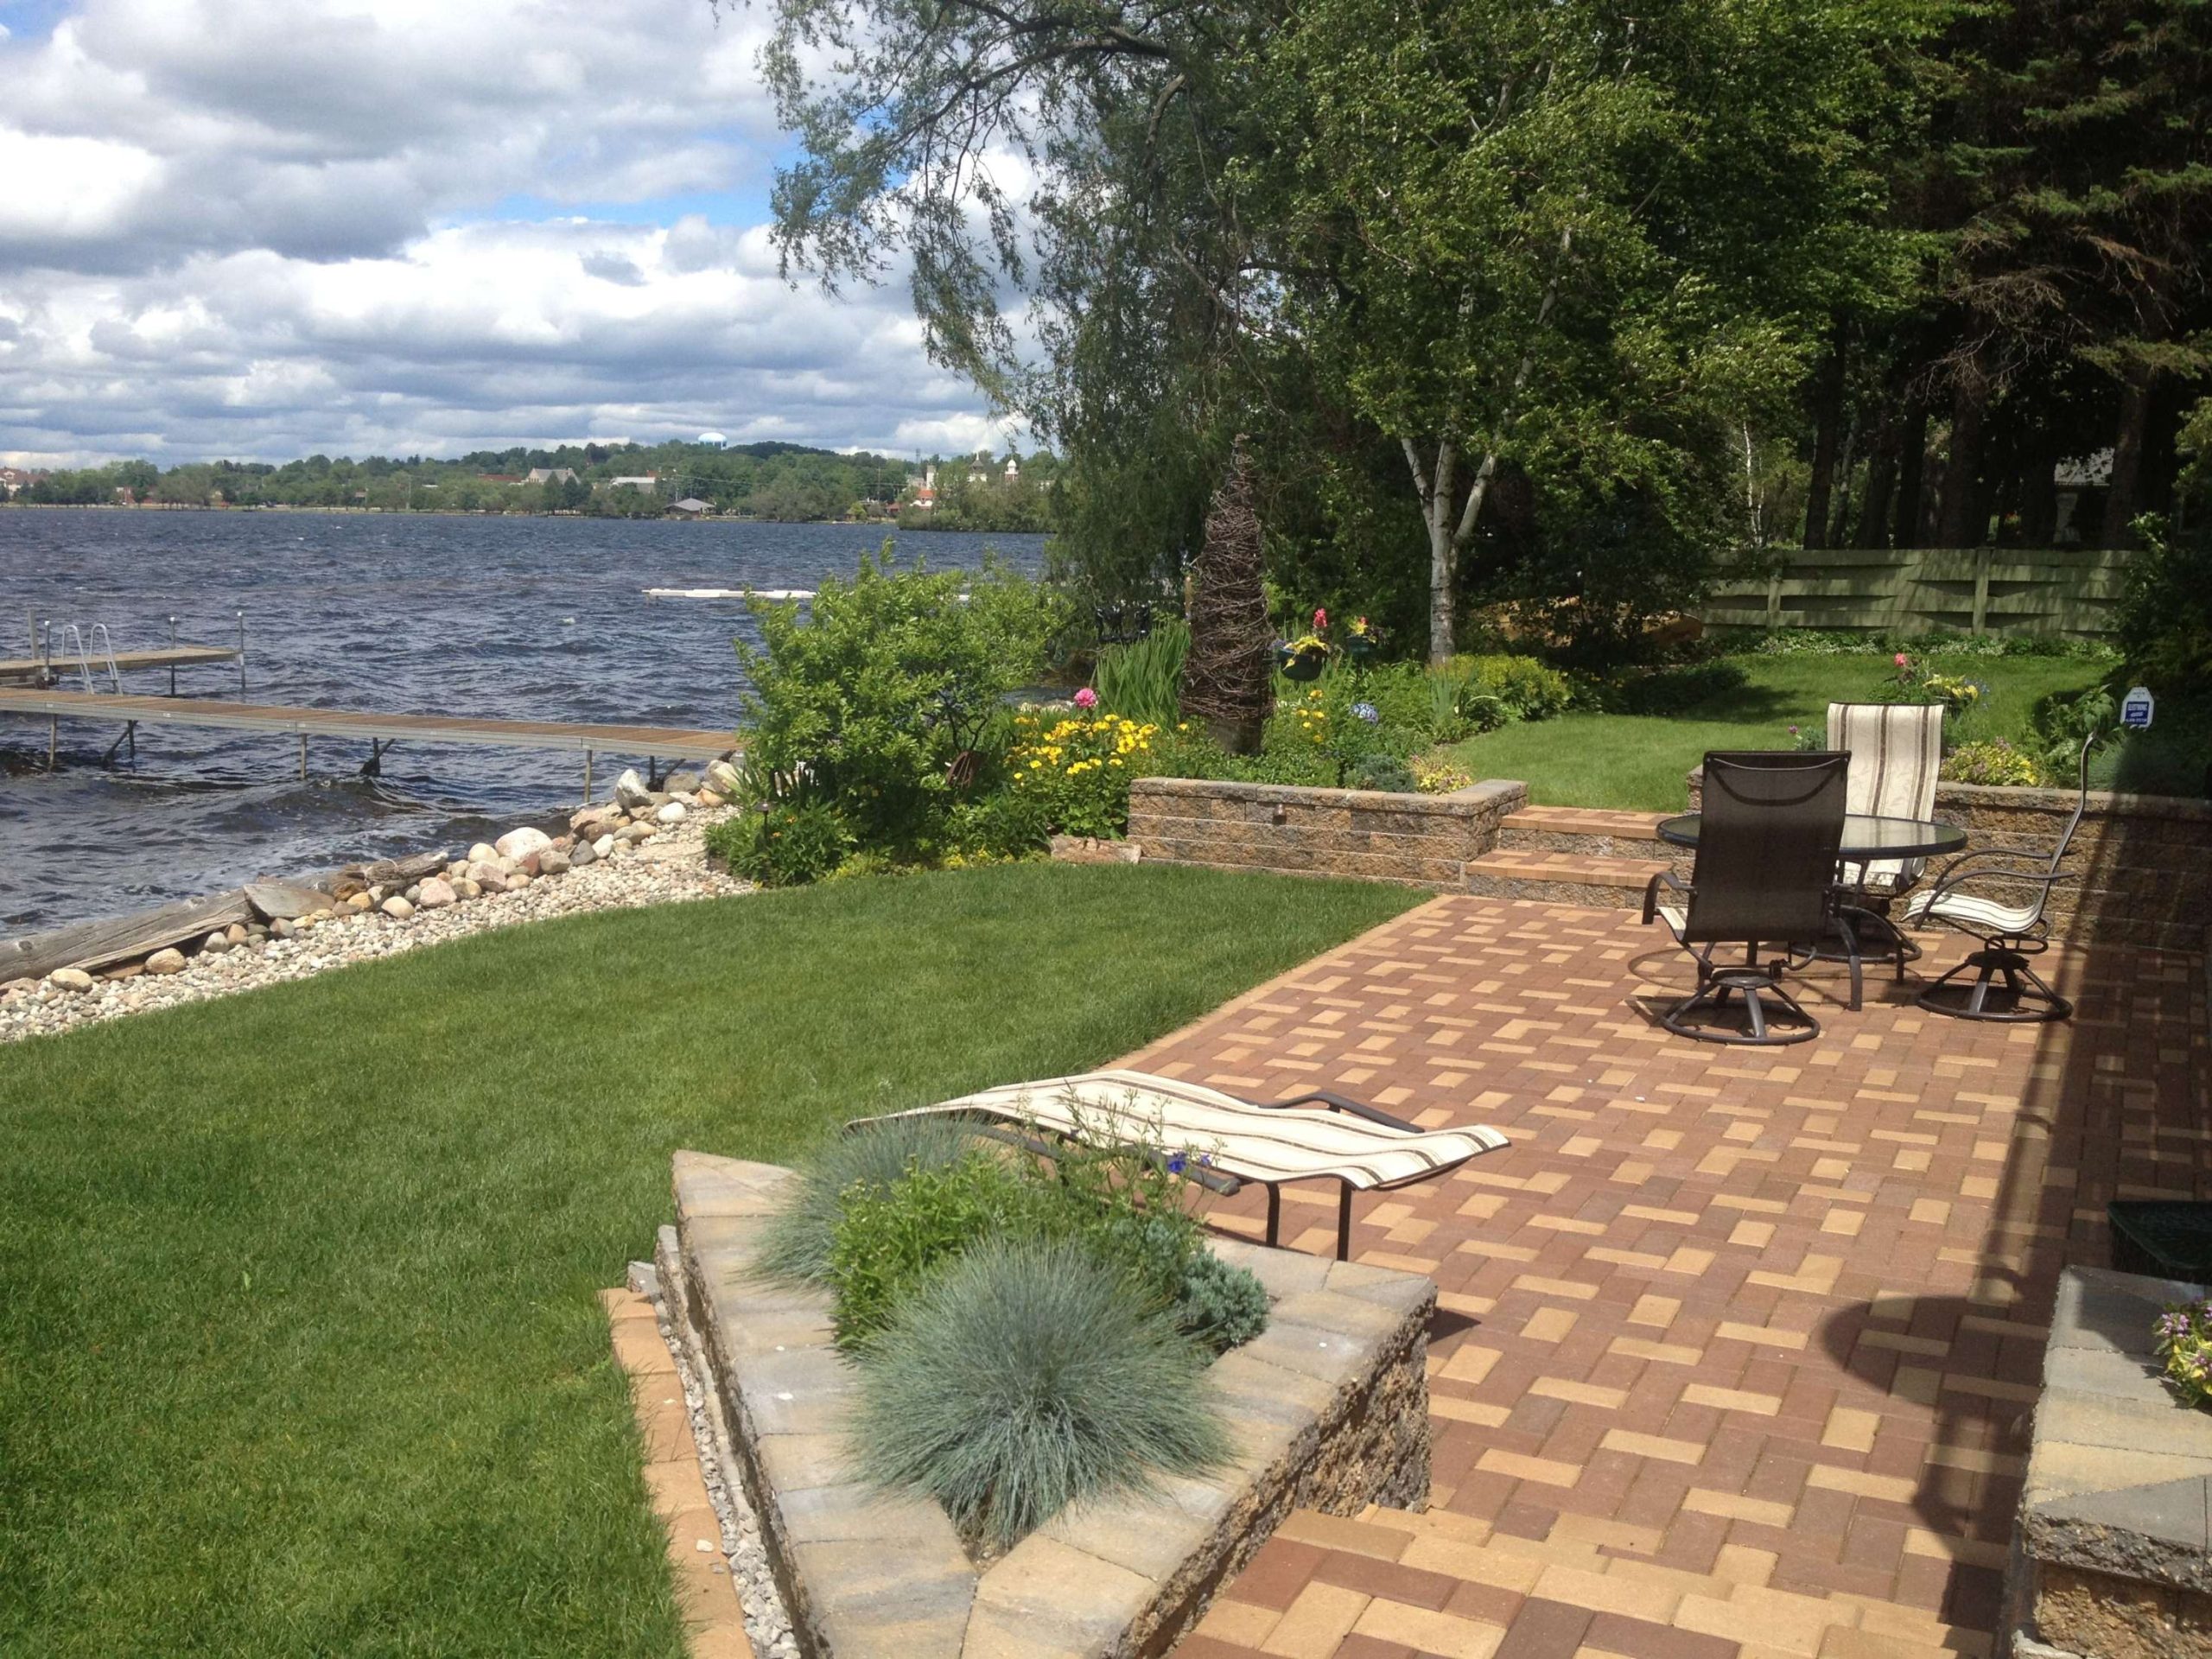 Lakefront Patio and Landscaping